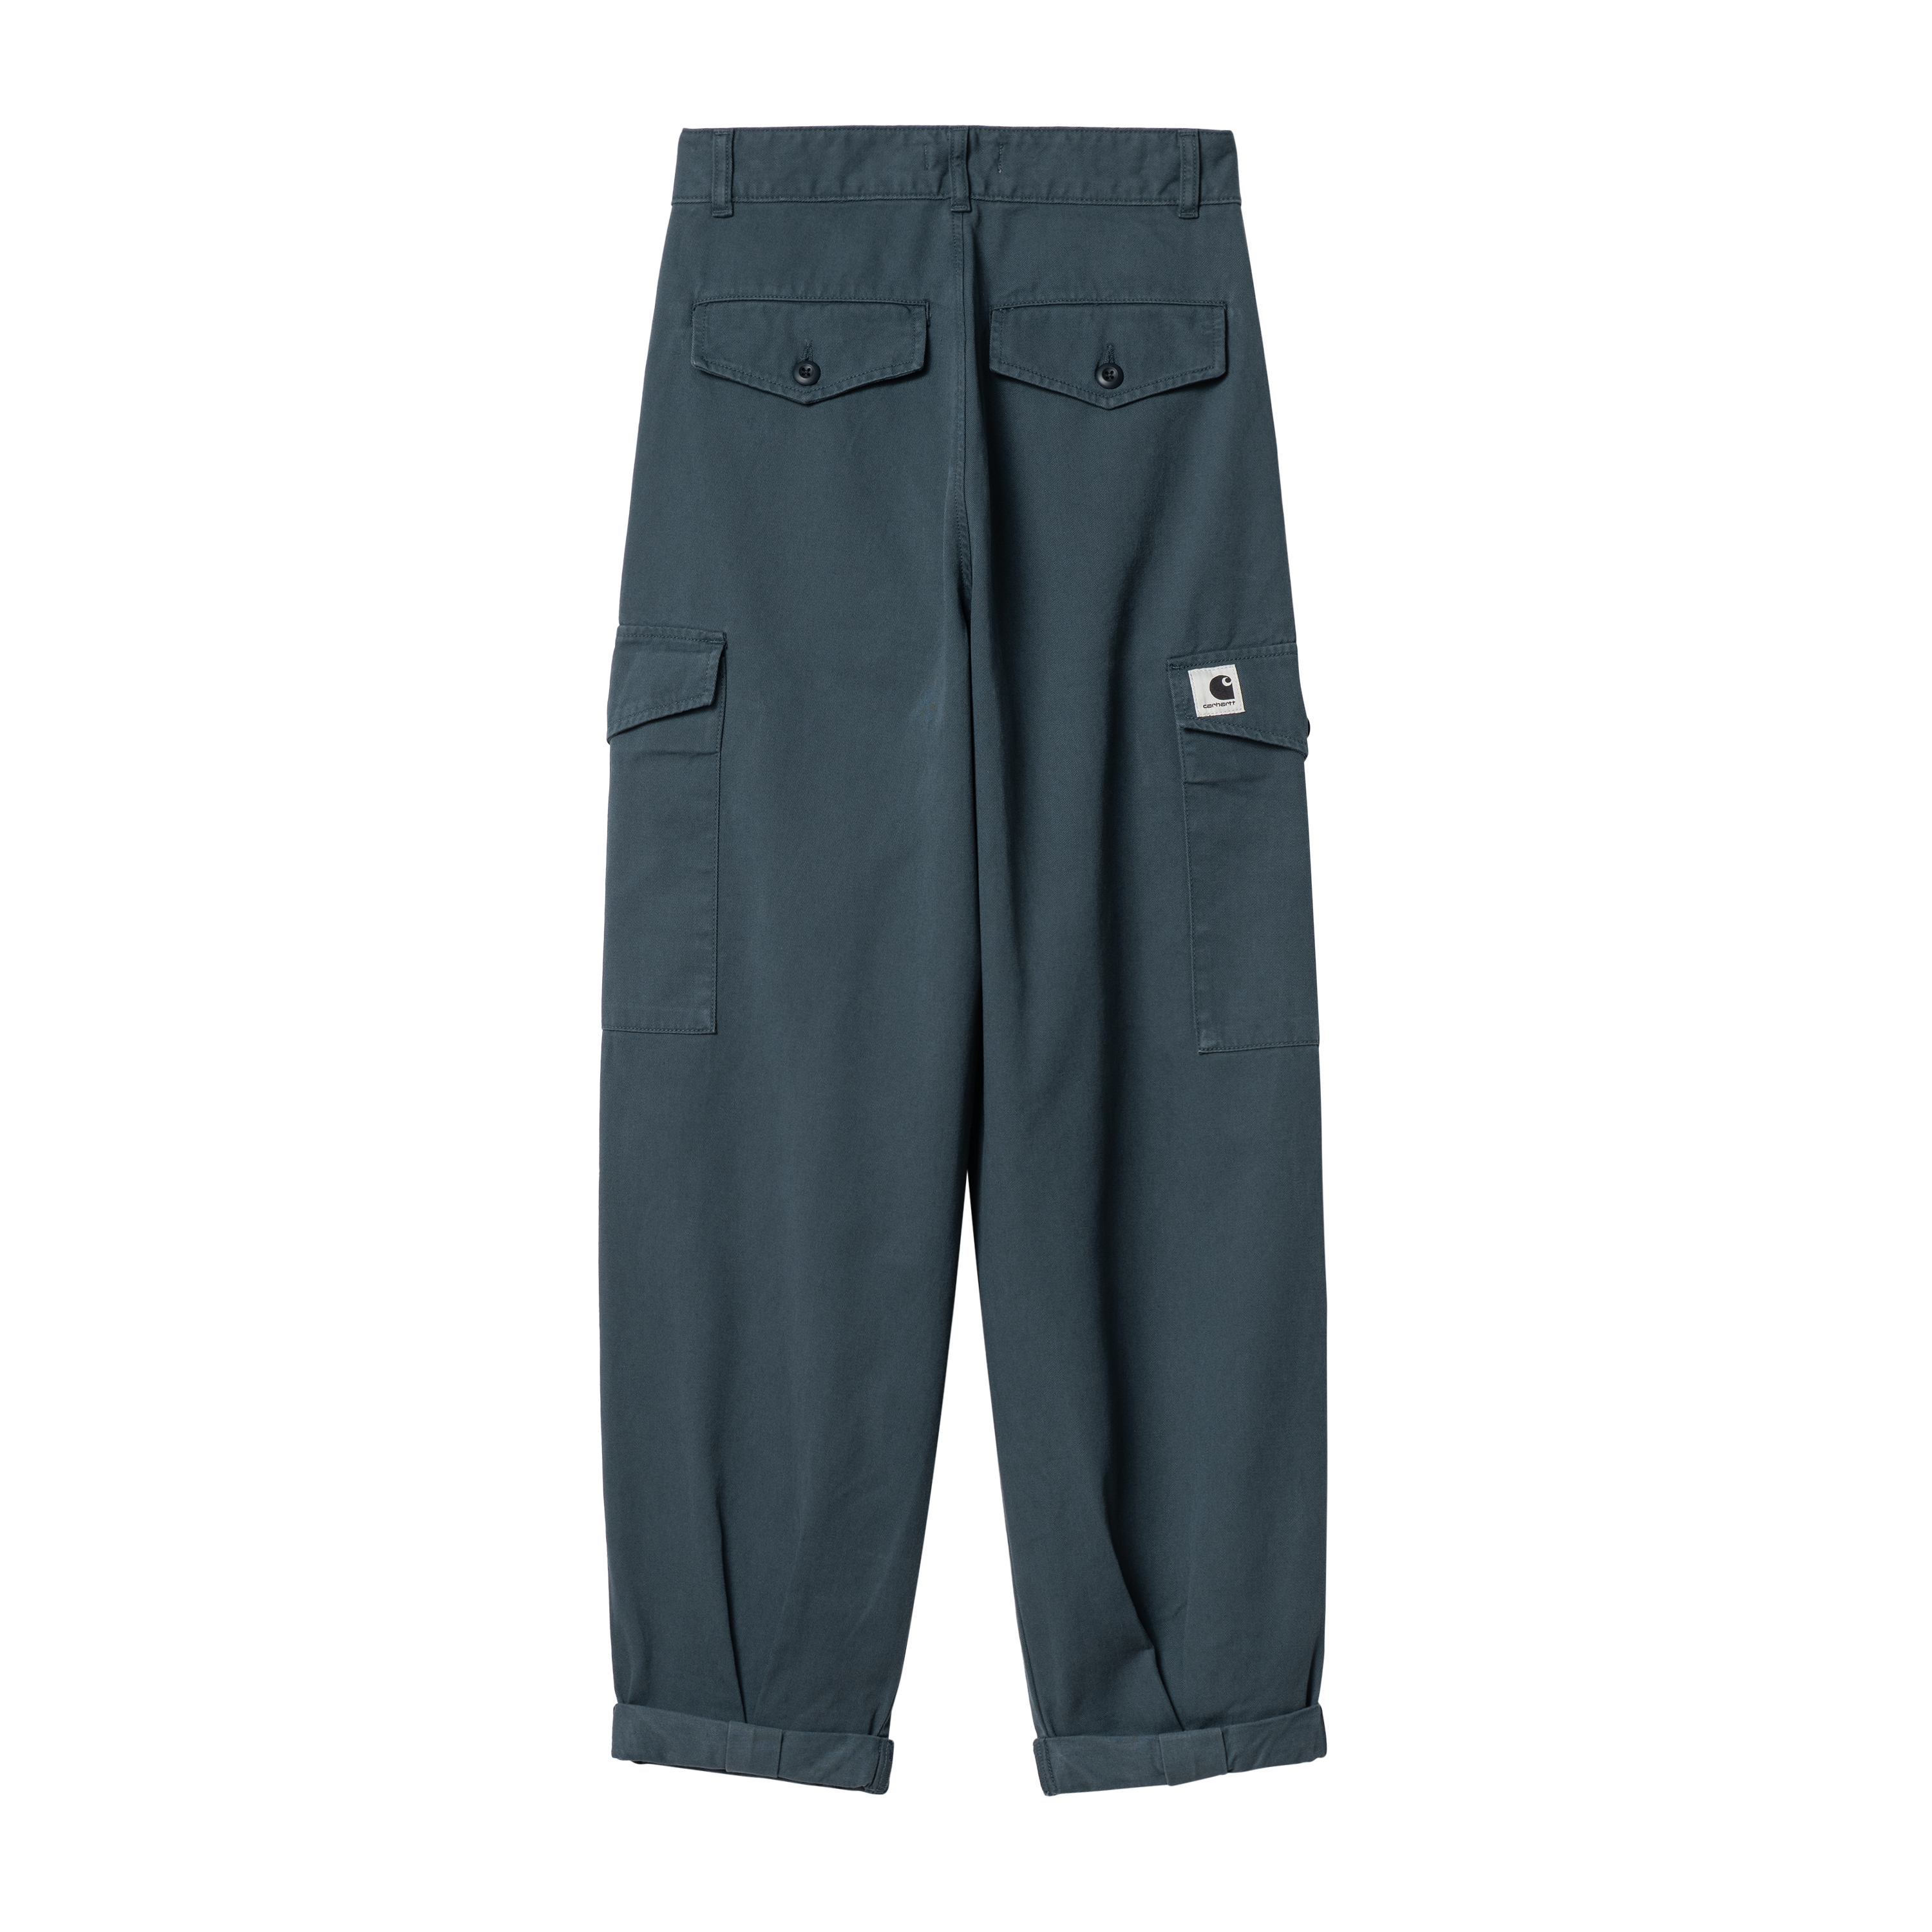 Carhartt Wip Wmns Collins Pant Brown - Womens - Casual Pants